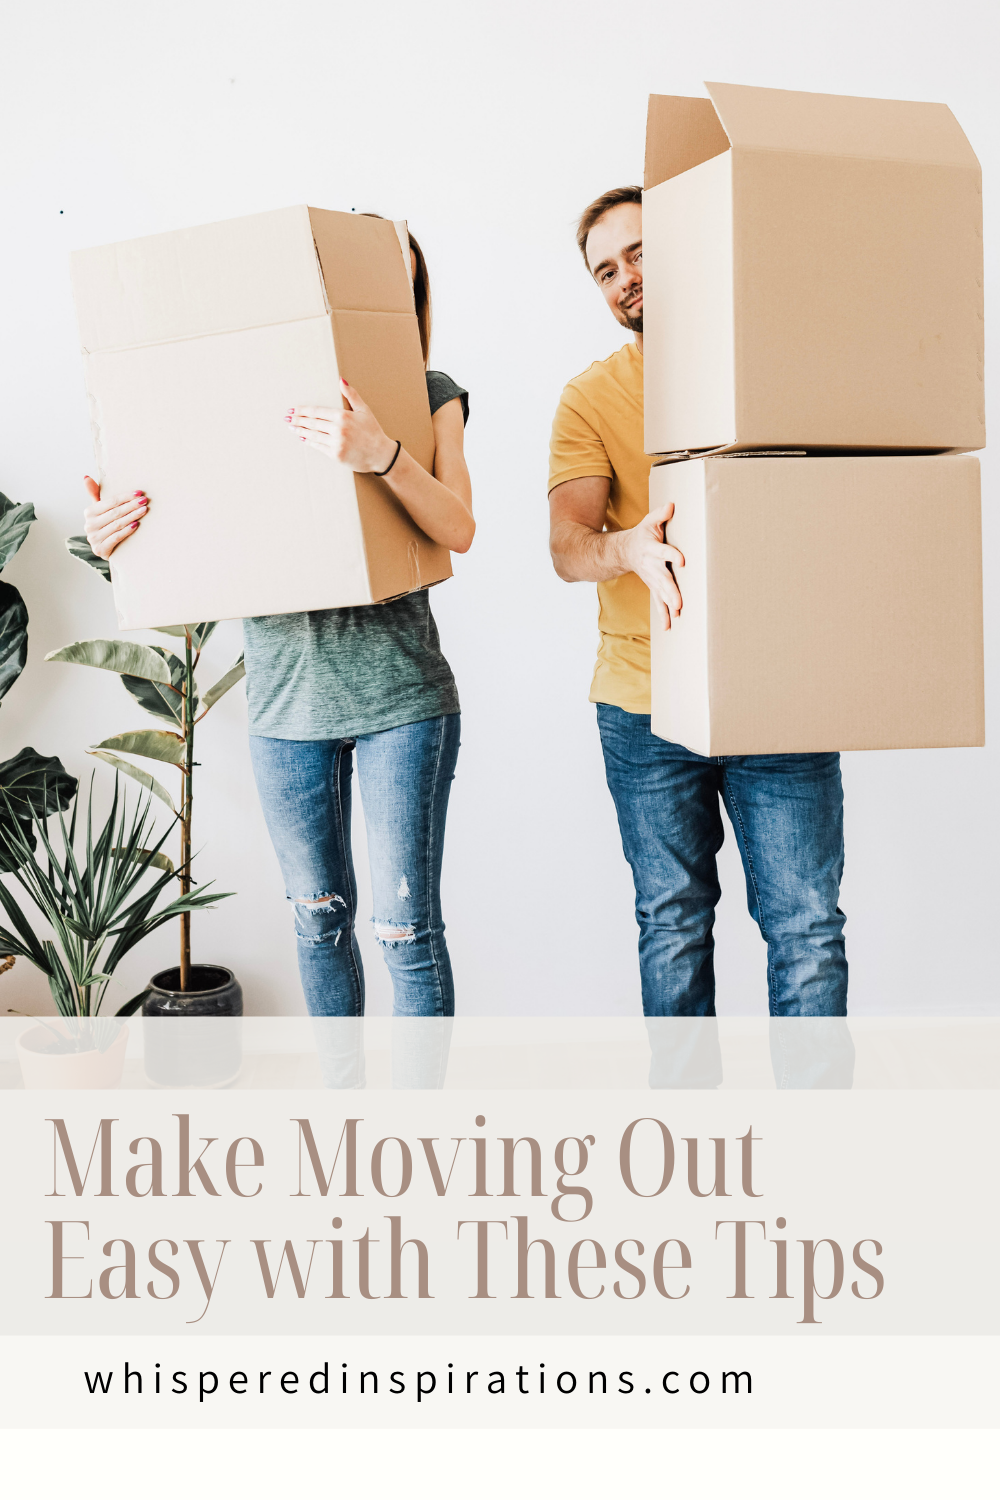 A man and a woman hold a moving box and are packing/unpacking. This article covers how to make moving out of your home easier with these tips.